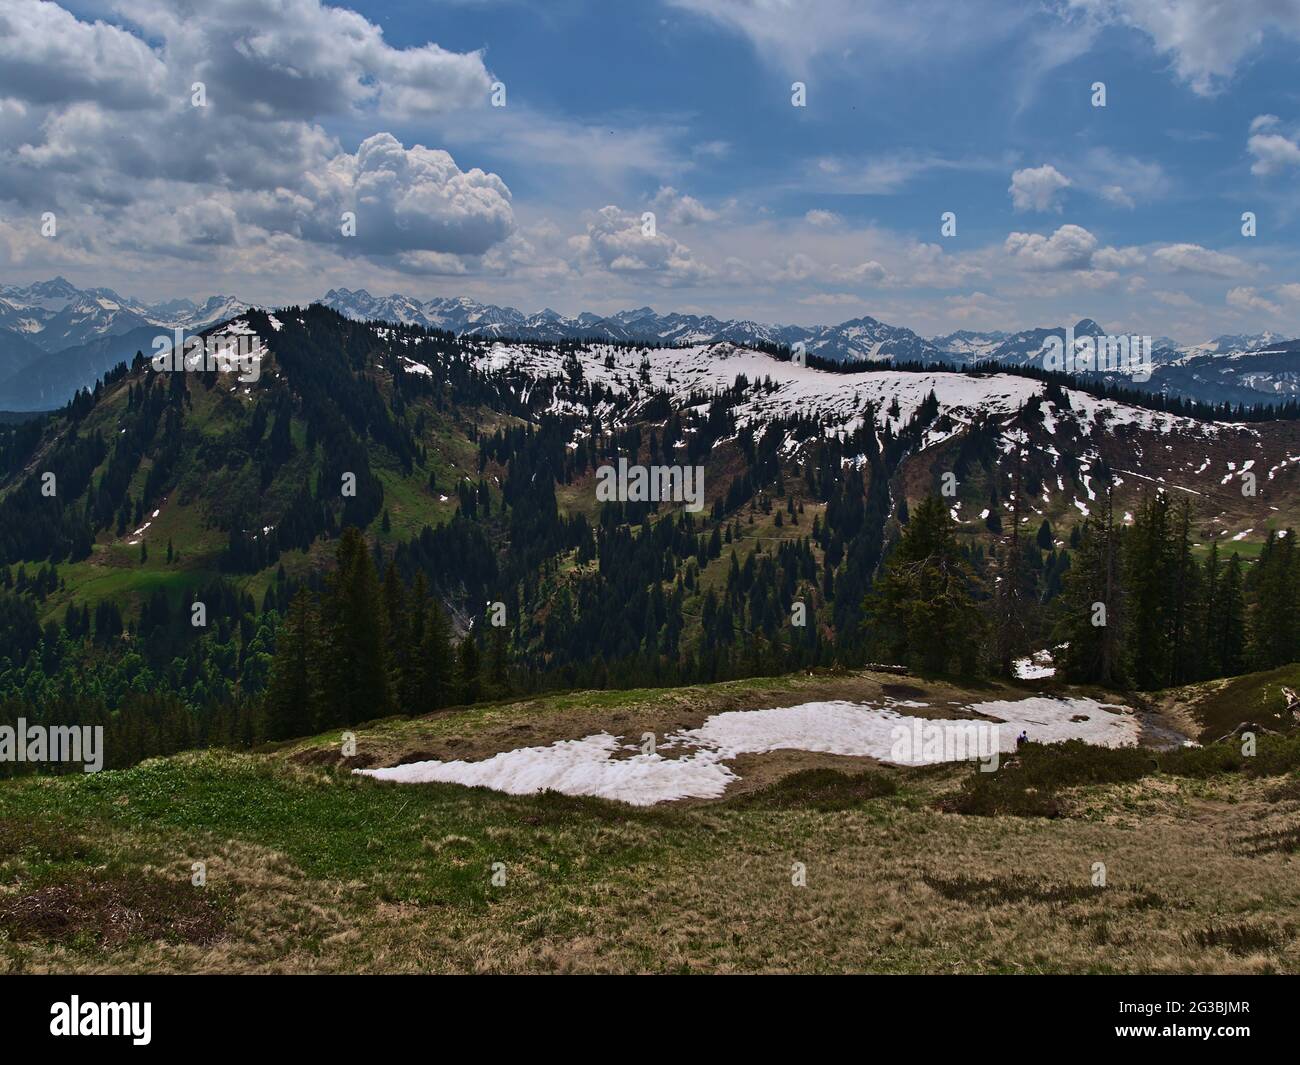 Mountain landscape in the Allgäu Alps in southern Bavaria, Germany on sunny day in early summer with residual snow, meadows, trees and mountains. Stock Photo